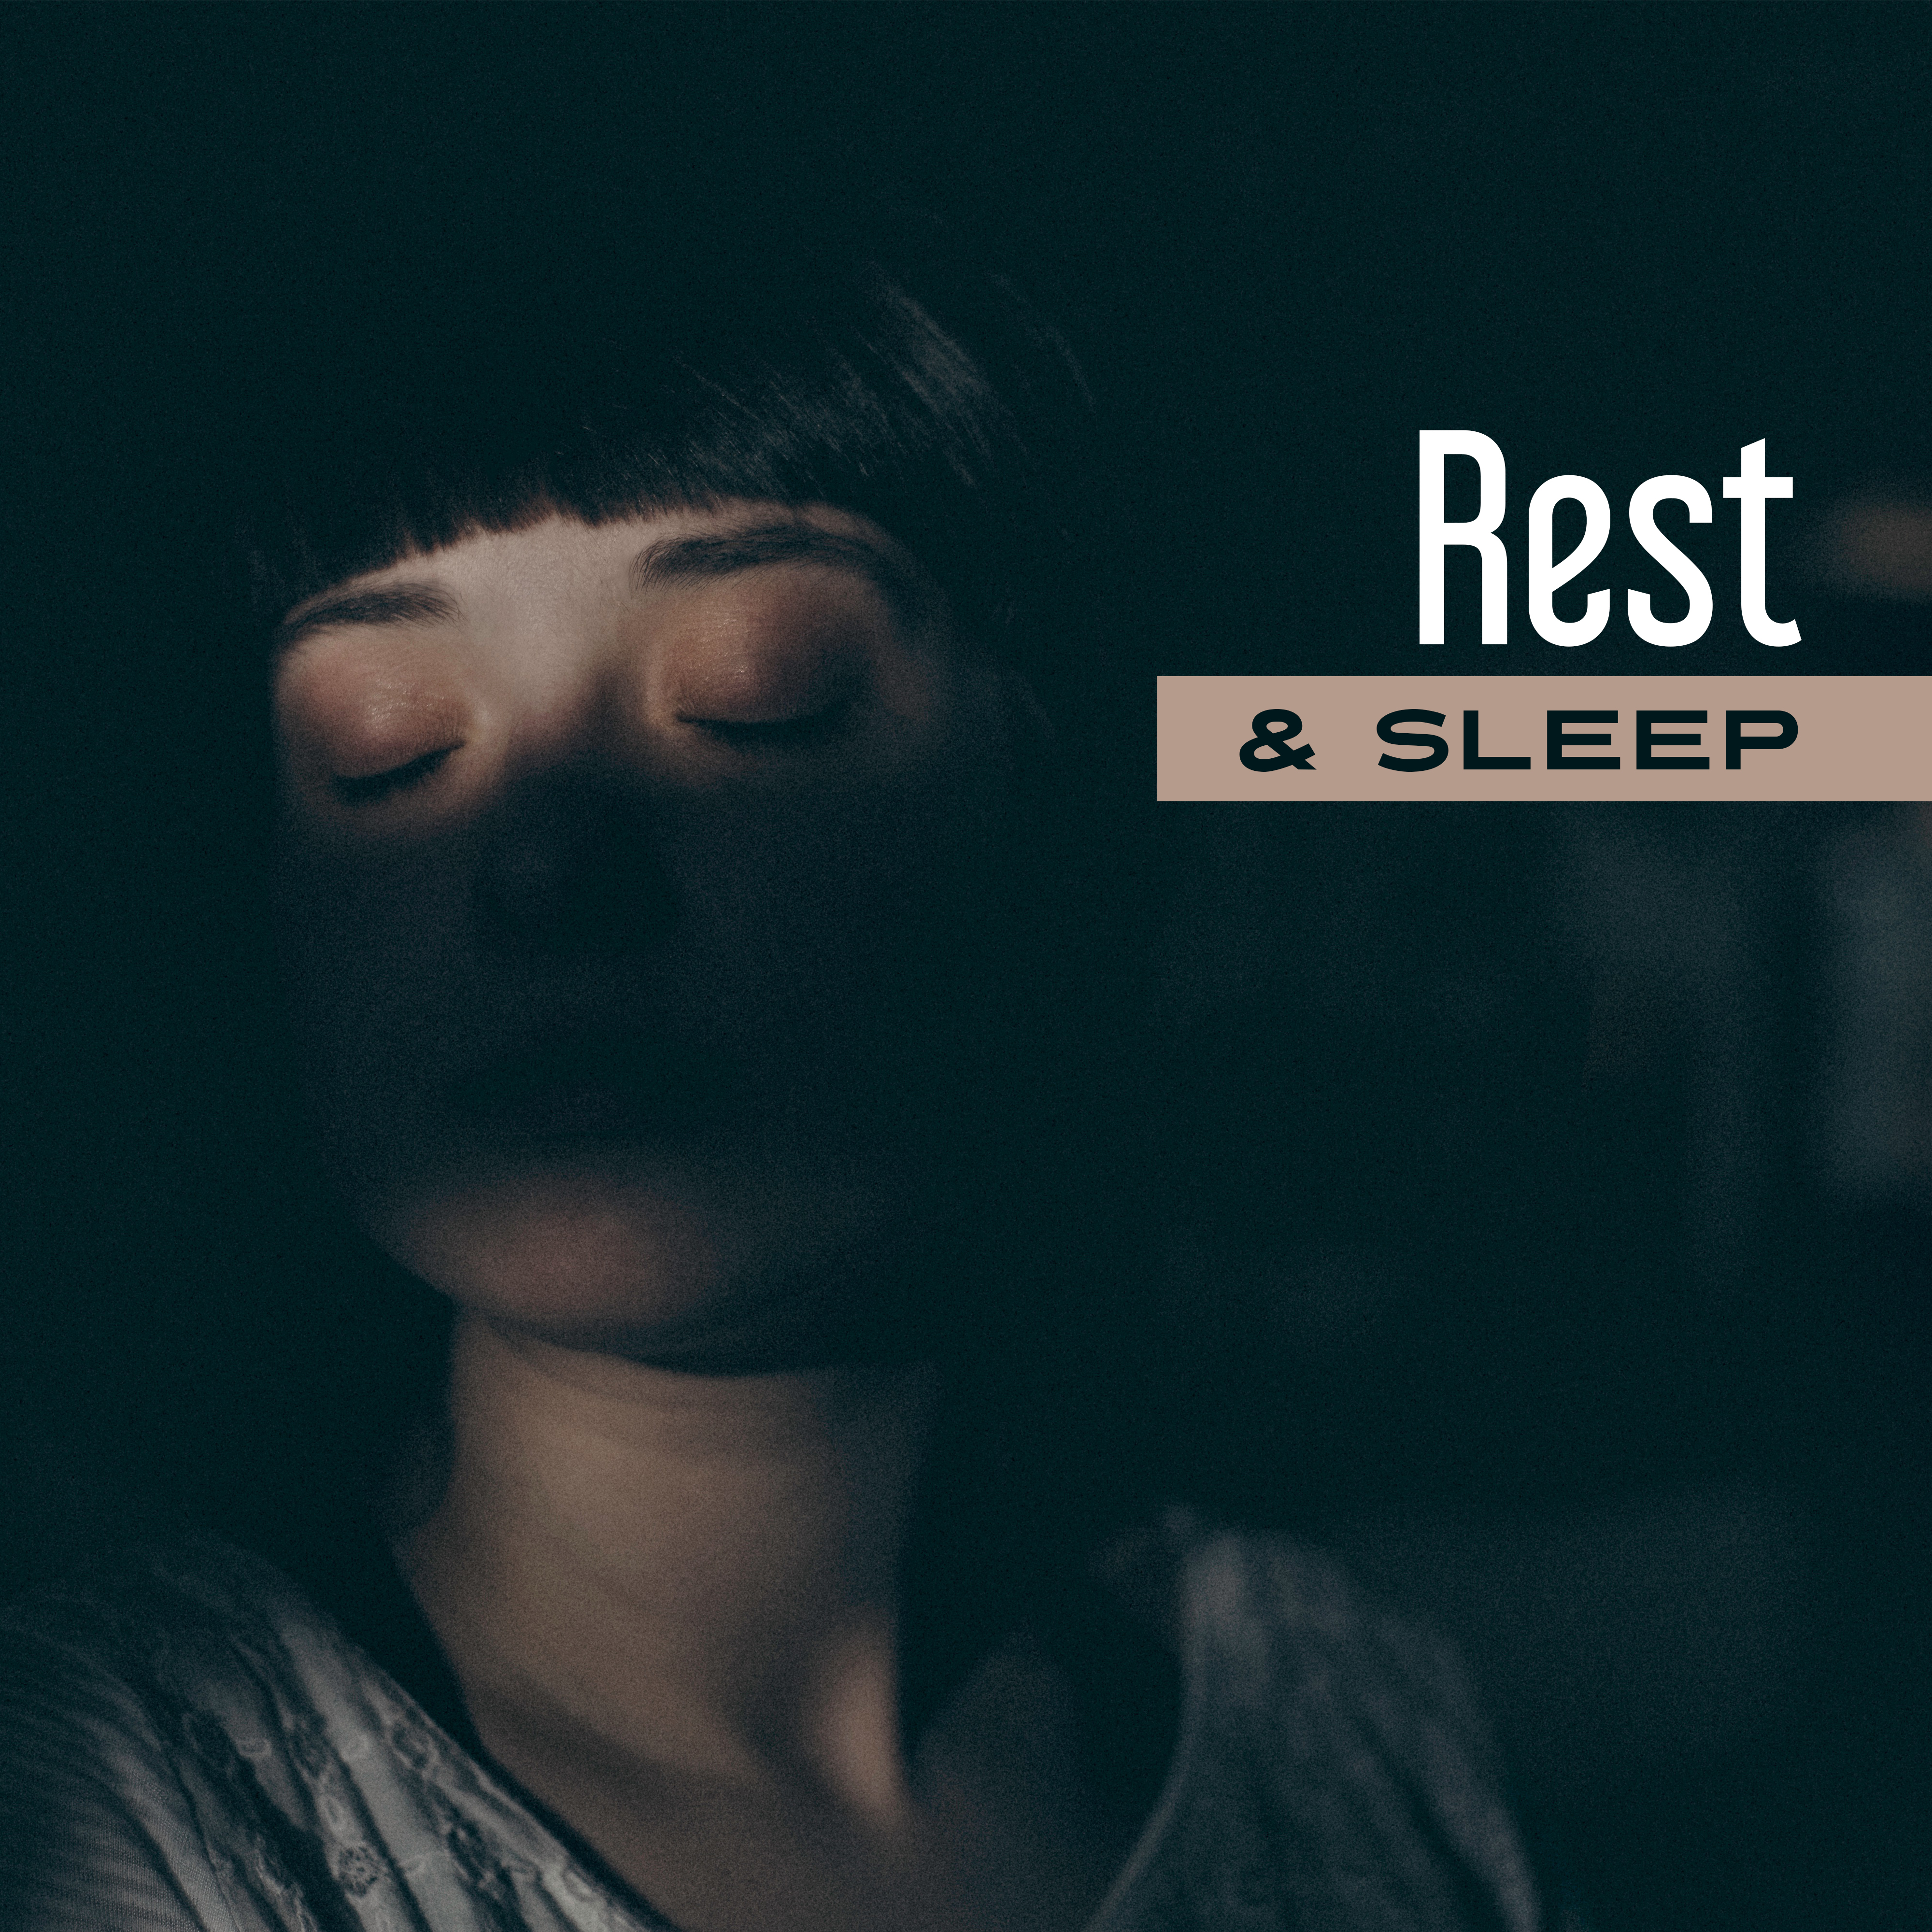 Rest & Sleep – Relaxing Therapy Music, Cure Insomnia, Deep Sleep, Lullabies for Bedtime Meditation, White Noise